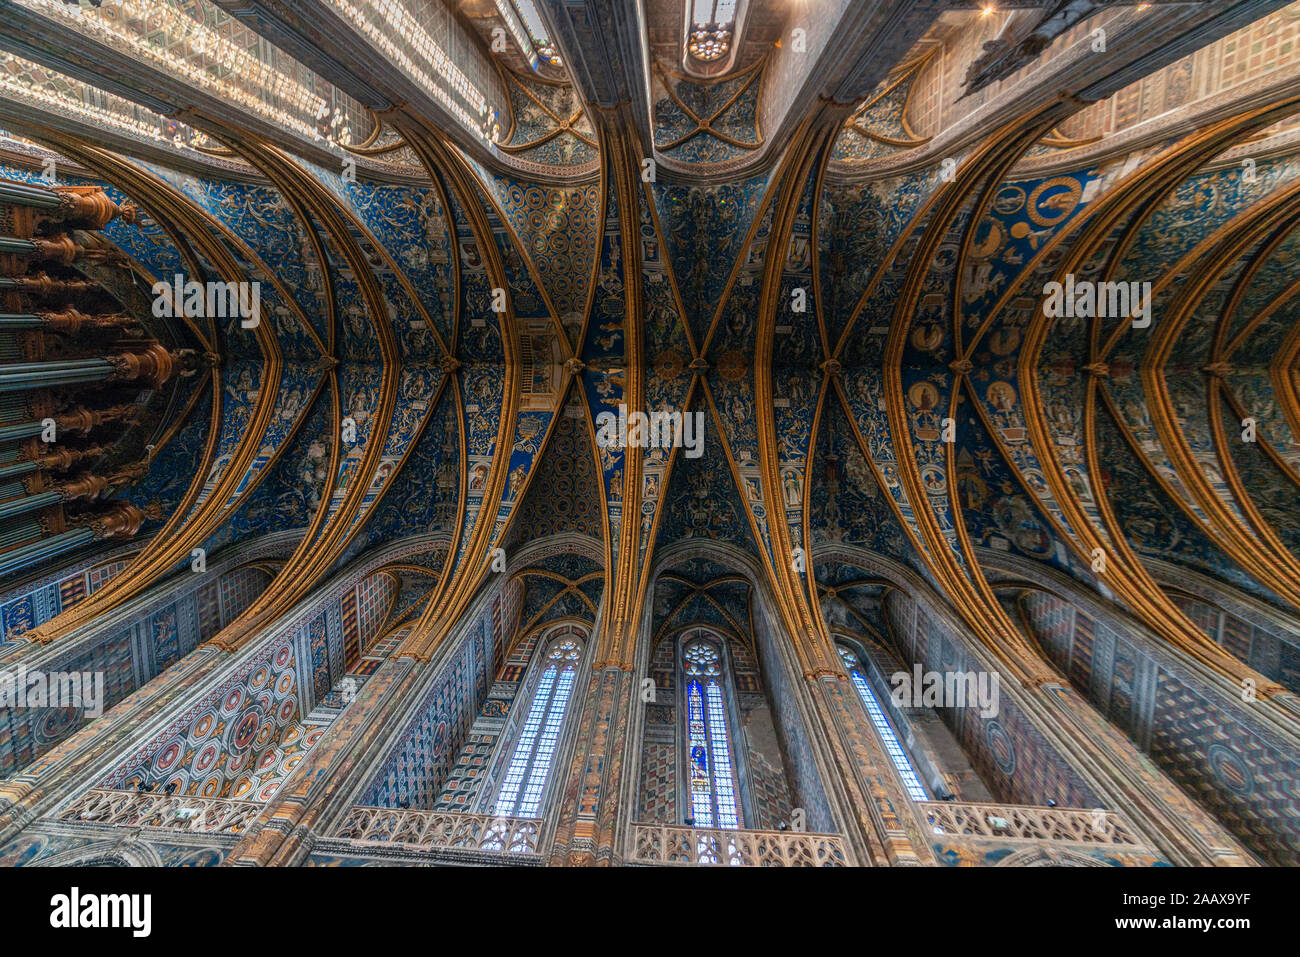 Ceiling detail of St Cecile Cathadral, in Albi, France. This was a major site associated with the 13th century Cathar heresies. Stock Photo